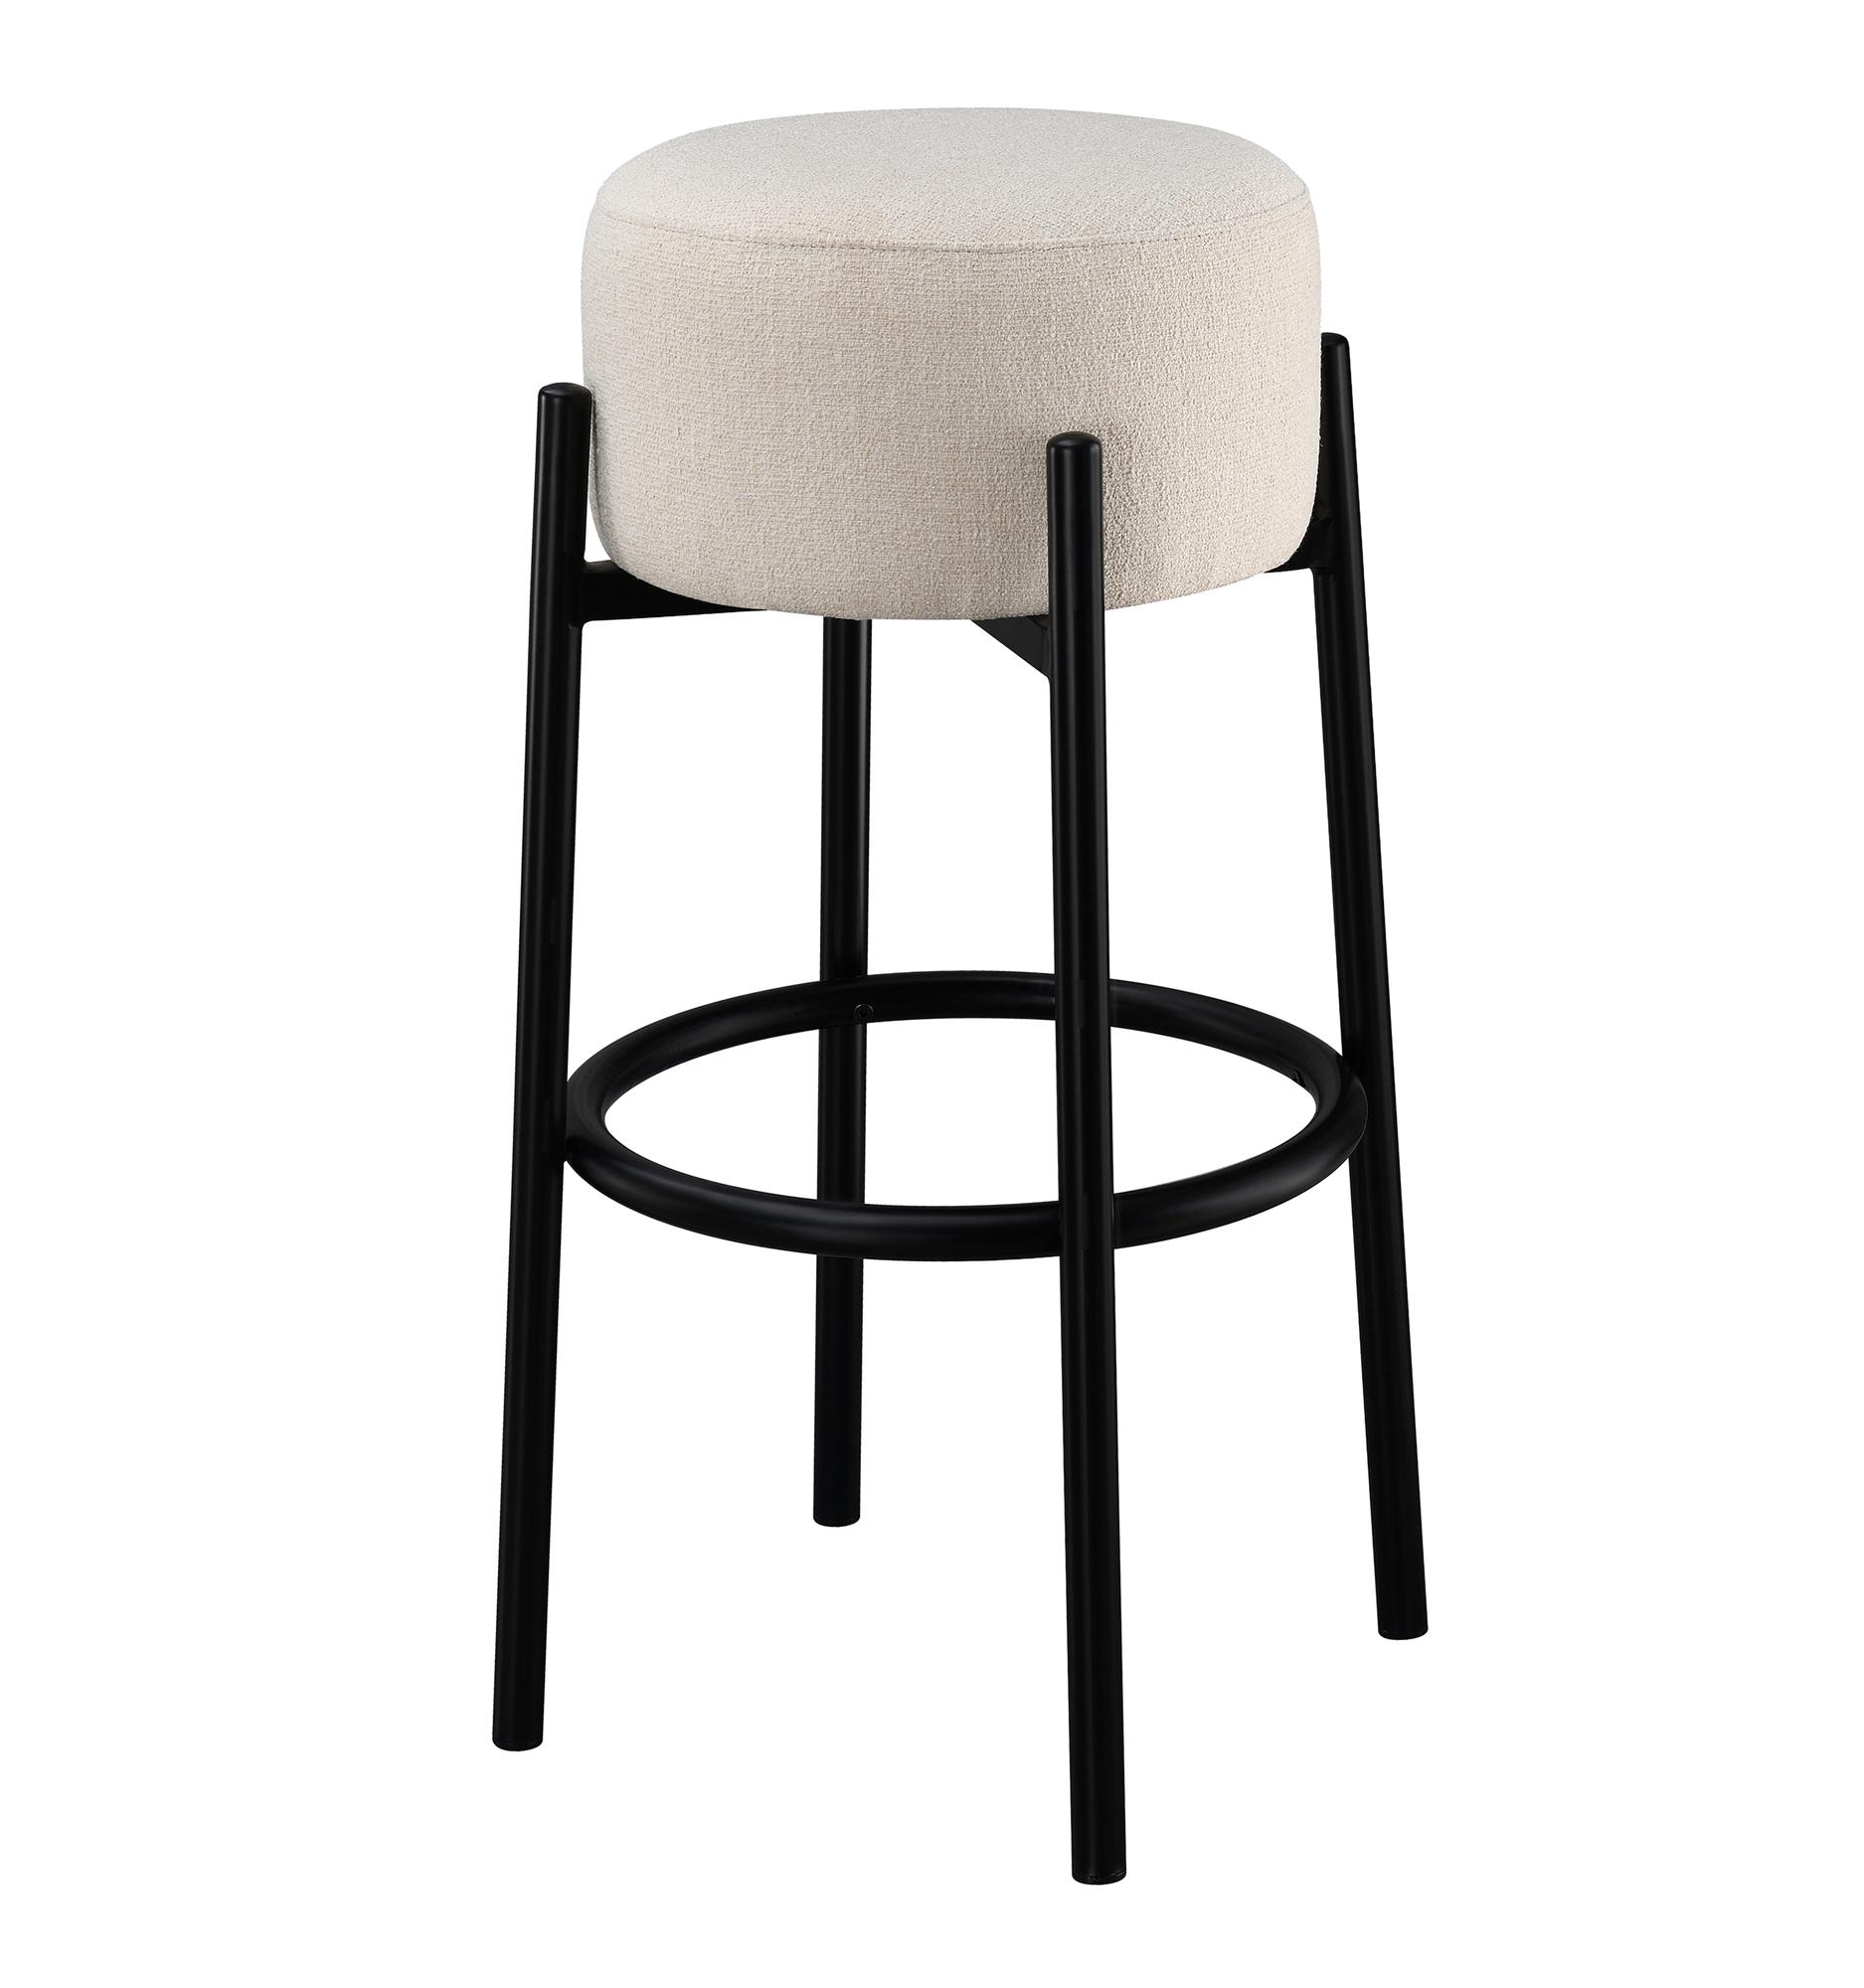 Contemporary Bar Stool Set 182176 182176 in White, Black Fabric